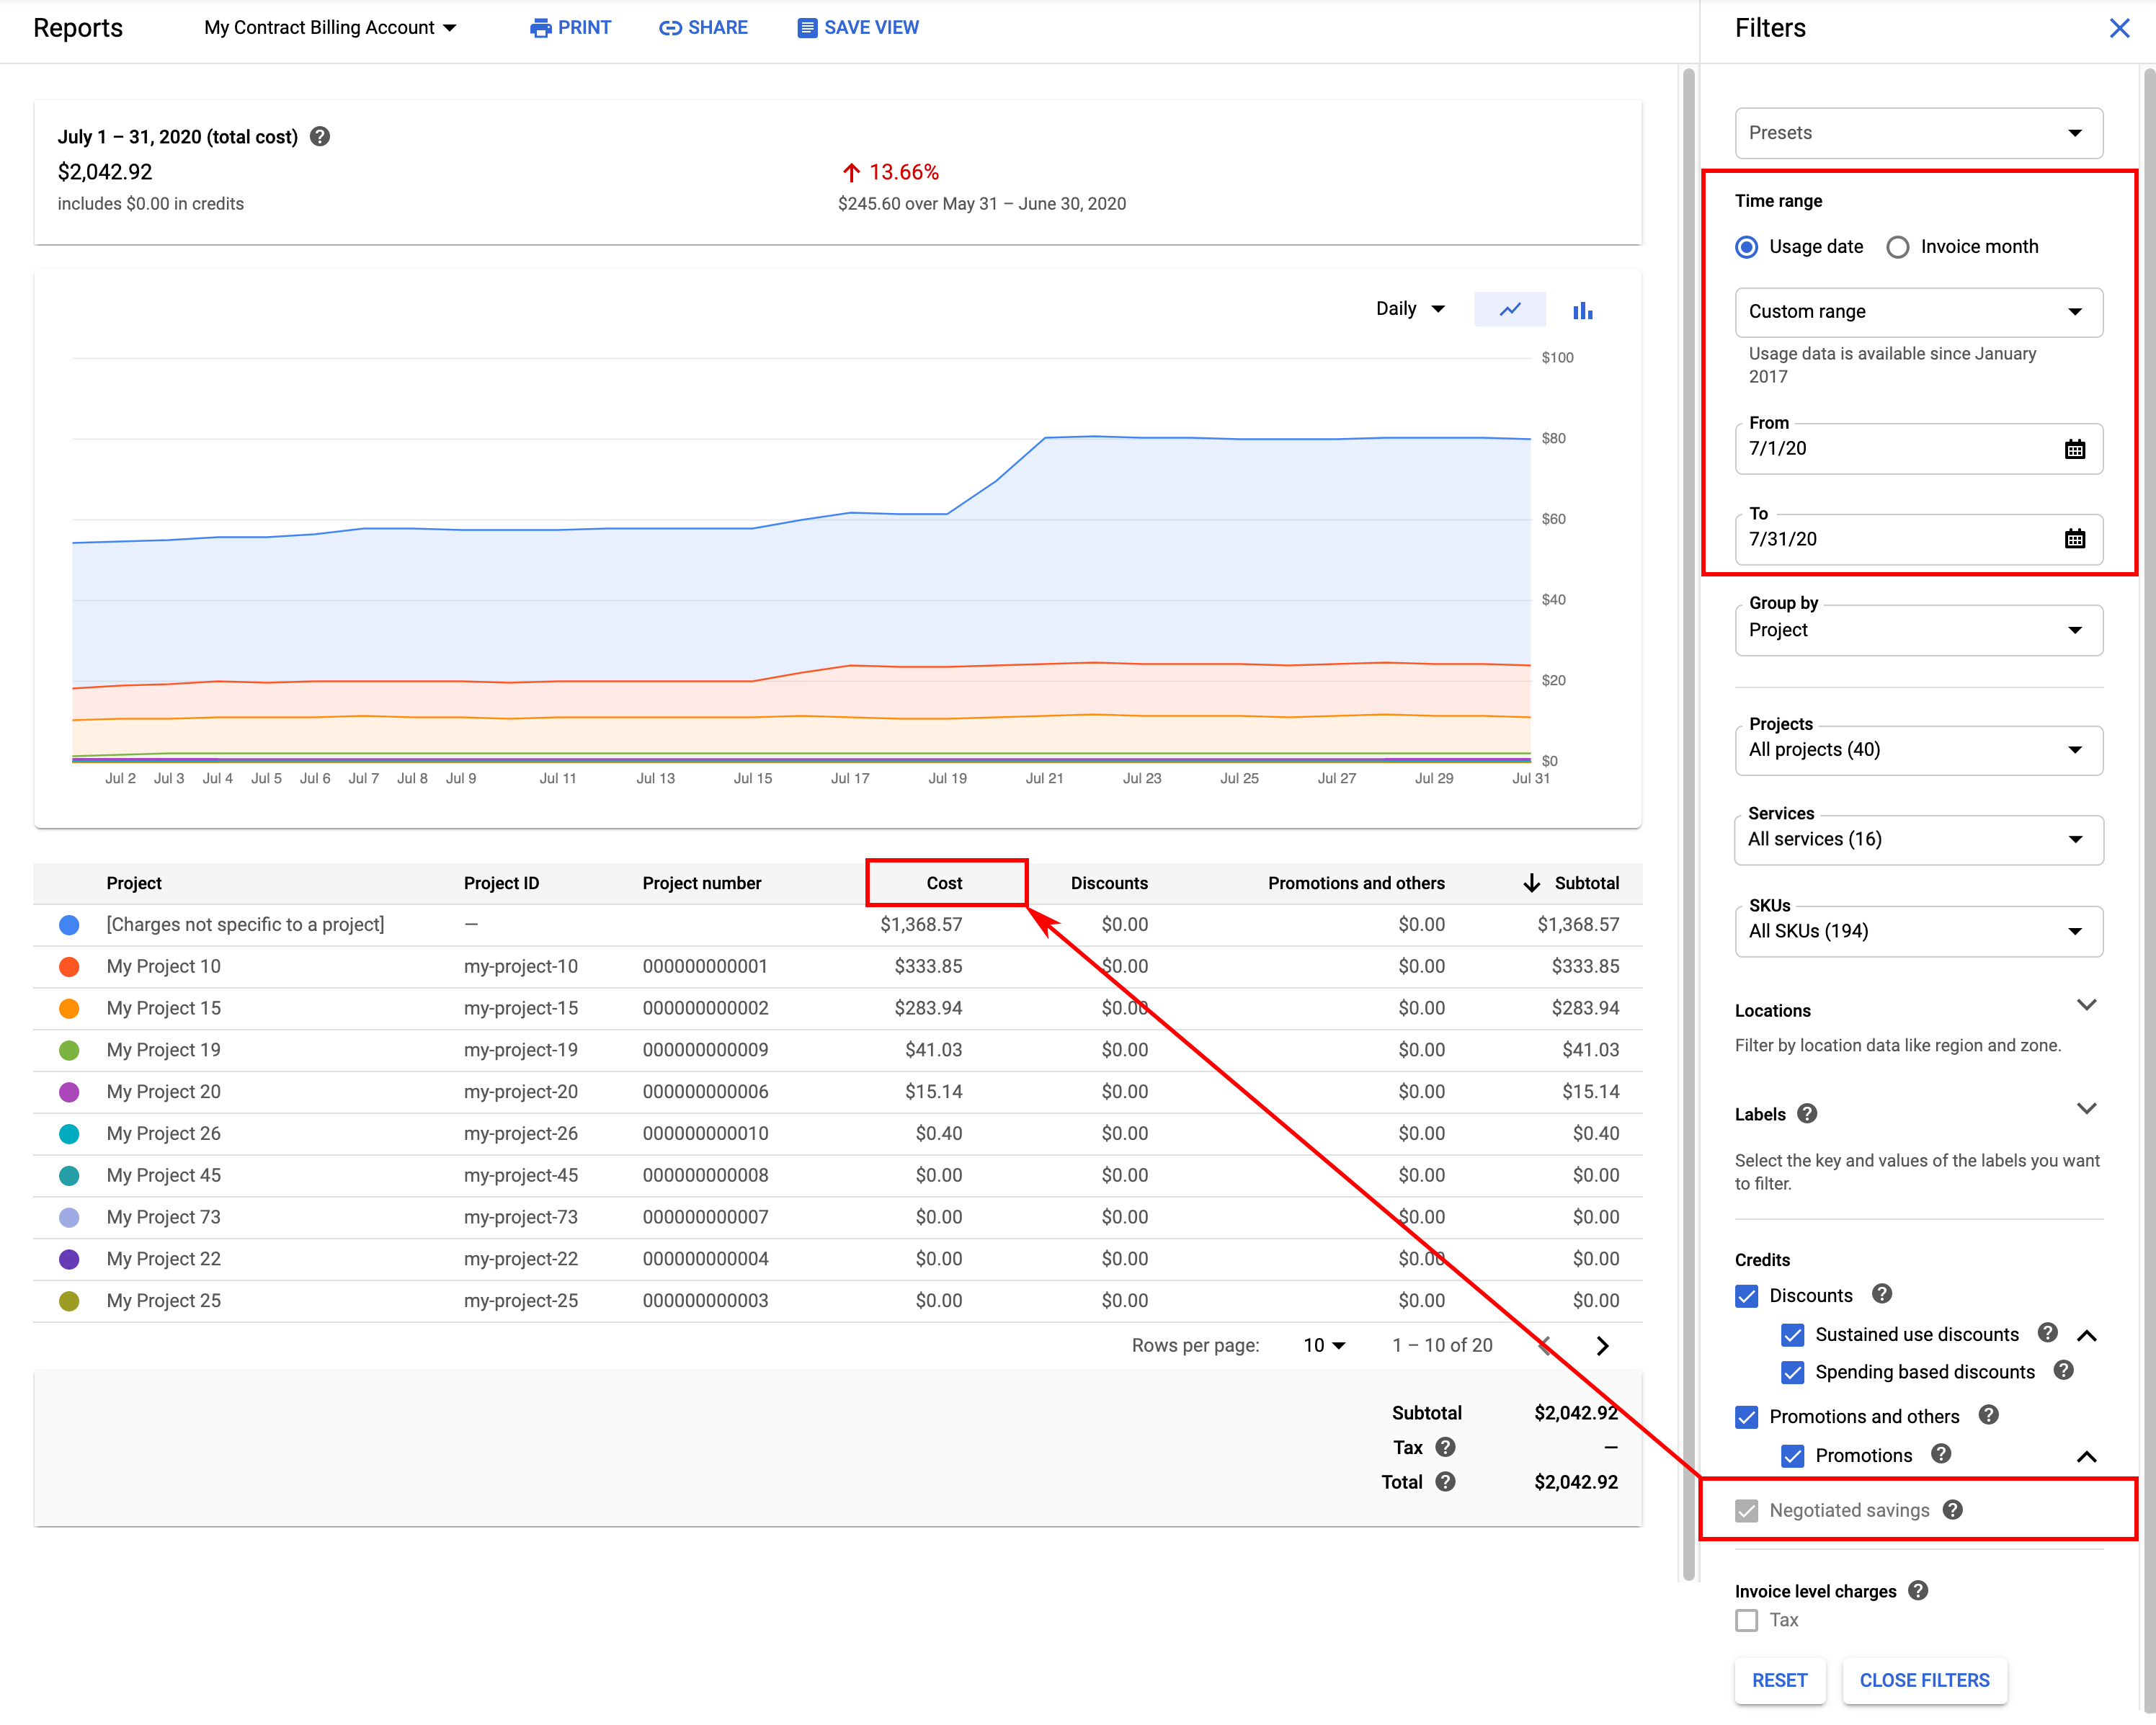 forfølgelse håndflade Minearbejder View your billing reports and cost trends | Cloud Billing | Google Cloud